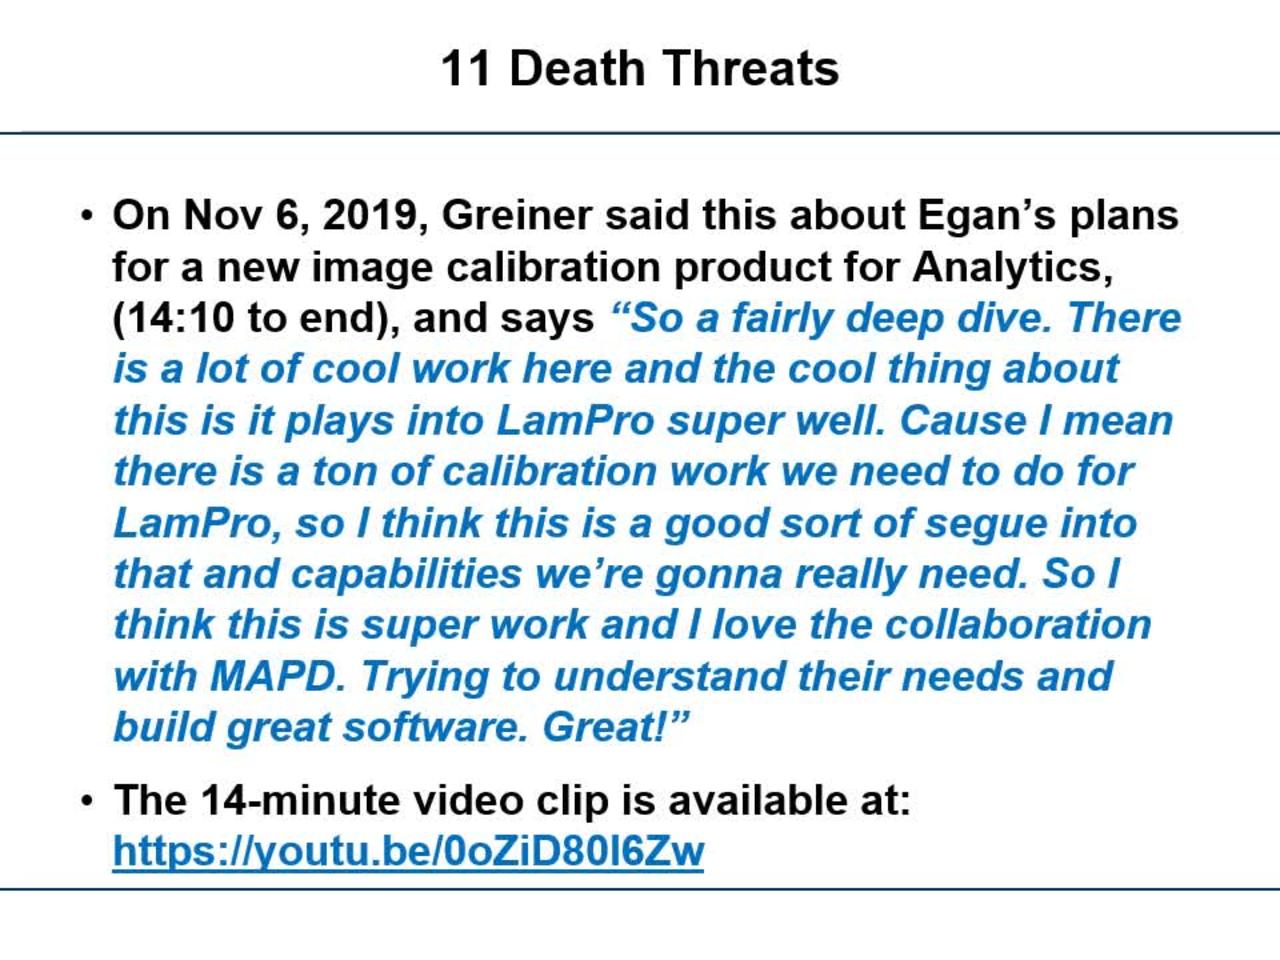 11 Death Threats from MIT, DOJ/FBI, and Lam Research to Dr. Egan